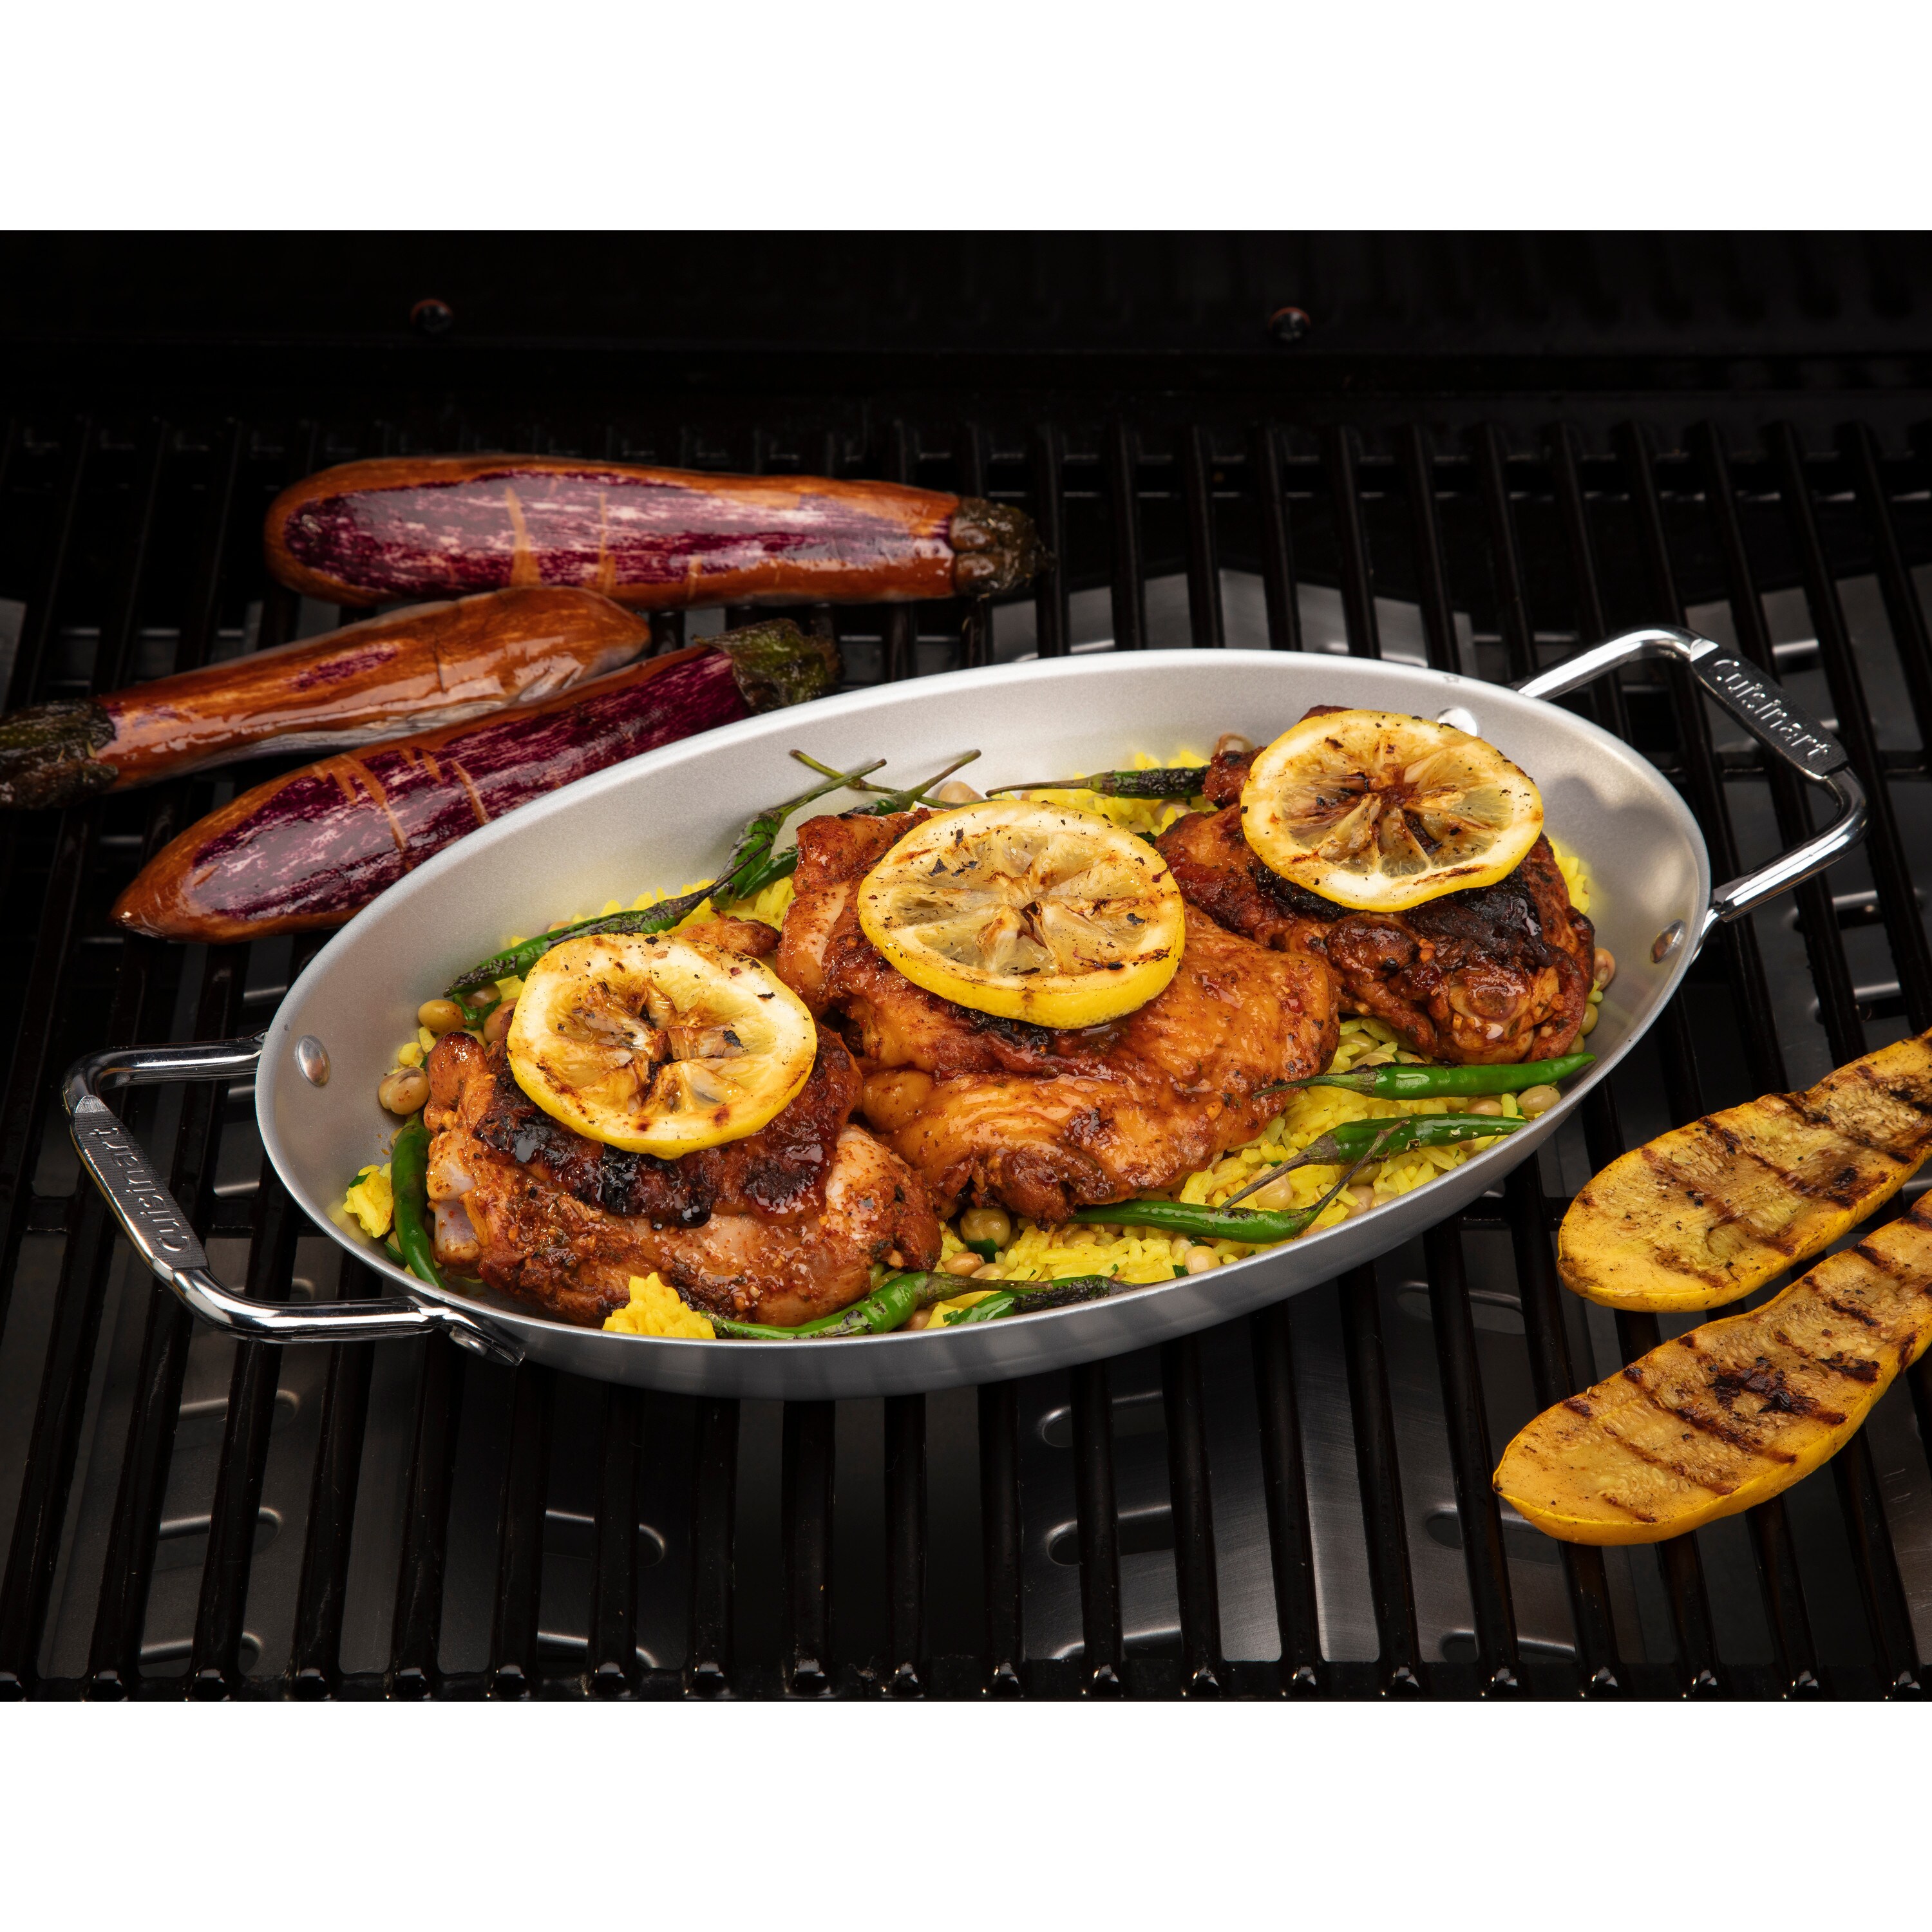 uncoated pan 28 cm seasoned carbon steel oven grill –